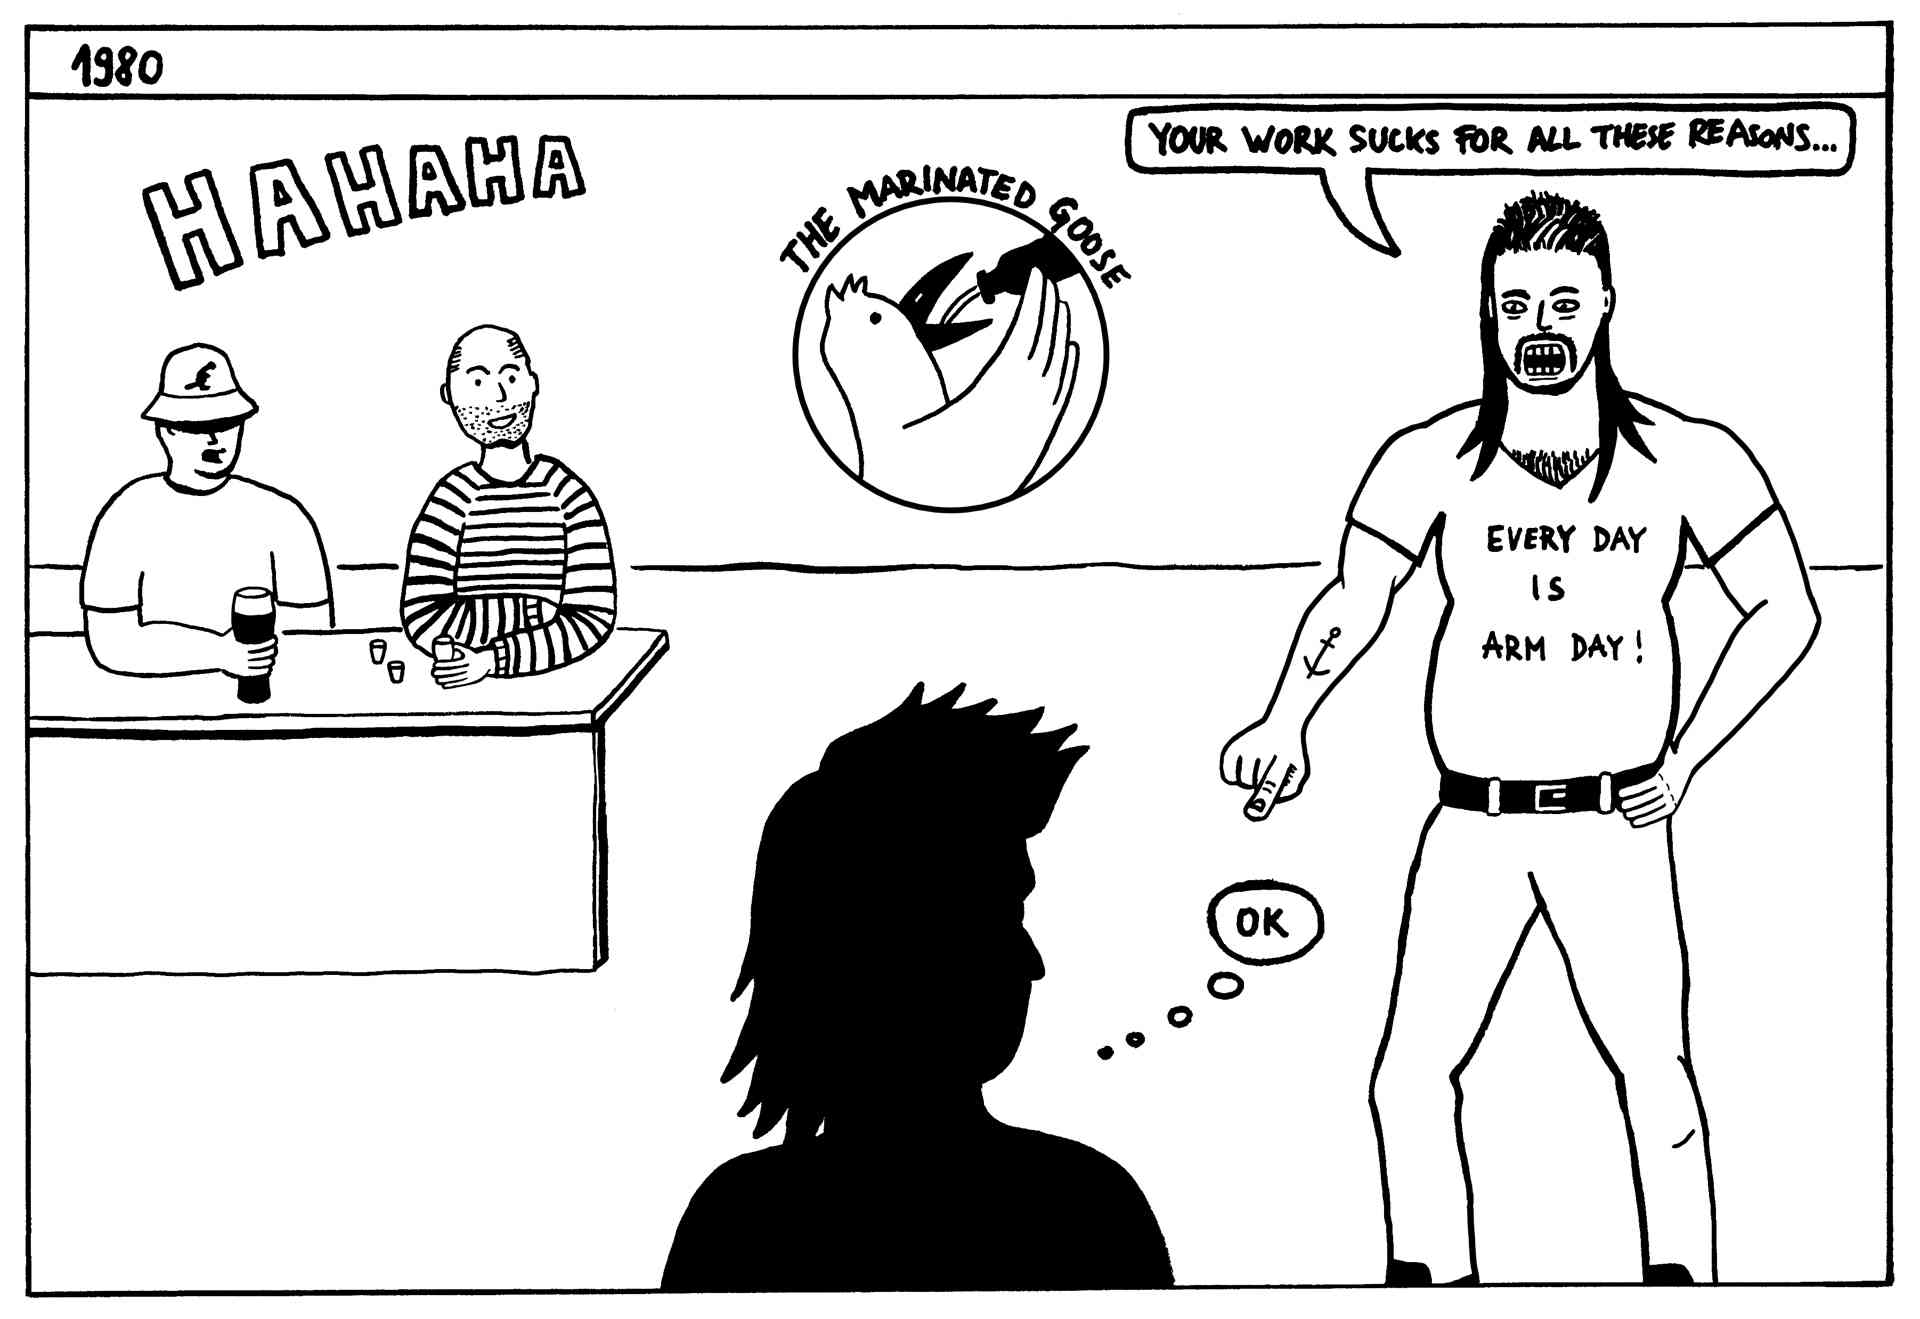 A large guy with a mullet is pointing his finger at the author in the center, saying Your work sucks for all these reasons... The author's friends in the corner of a bar are laughing at the mullet guy's insults. 